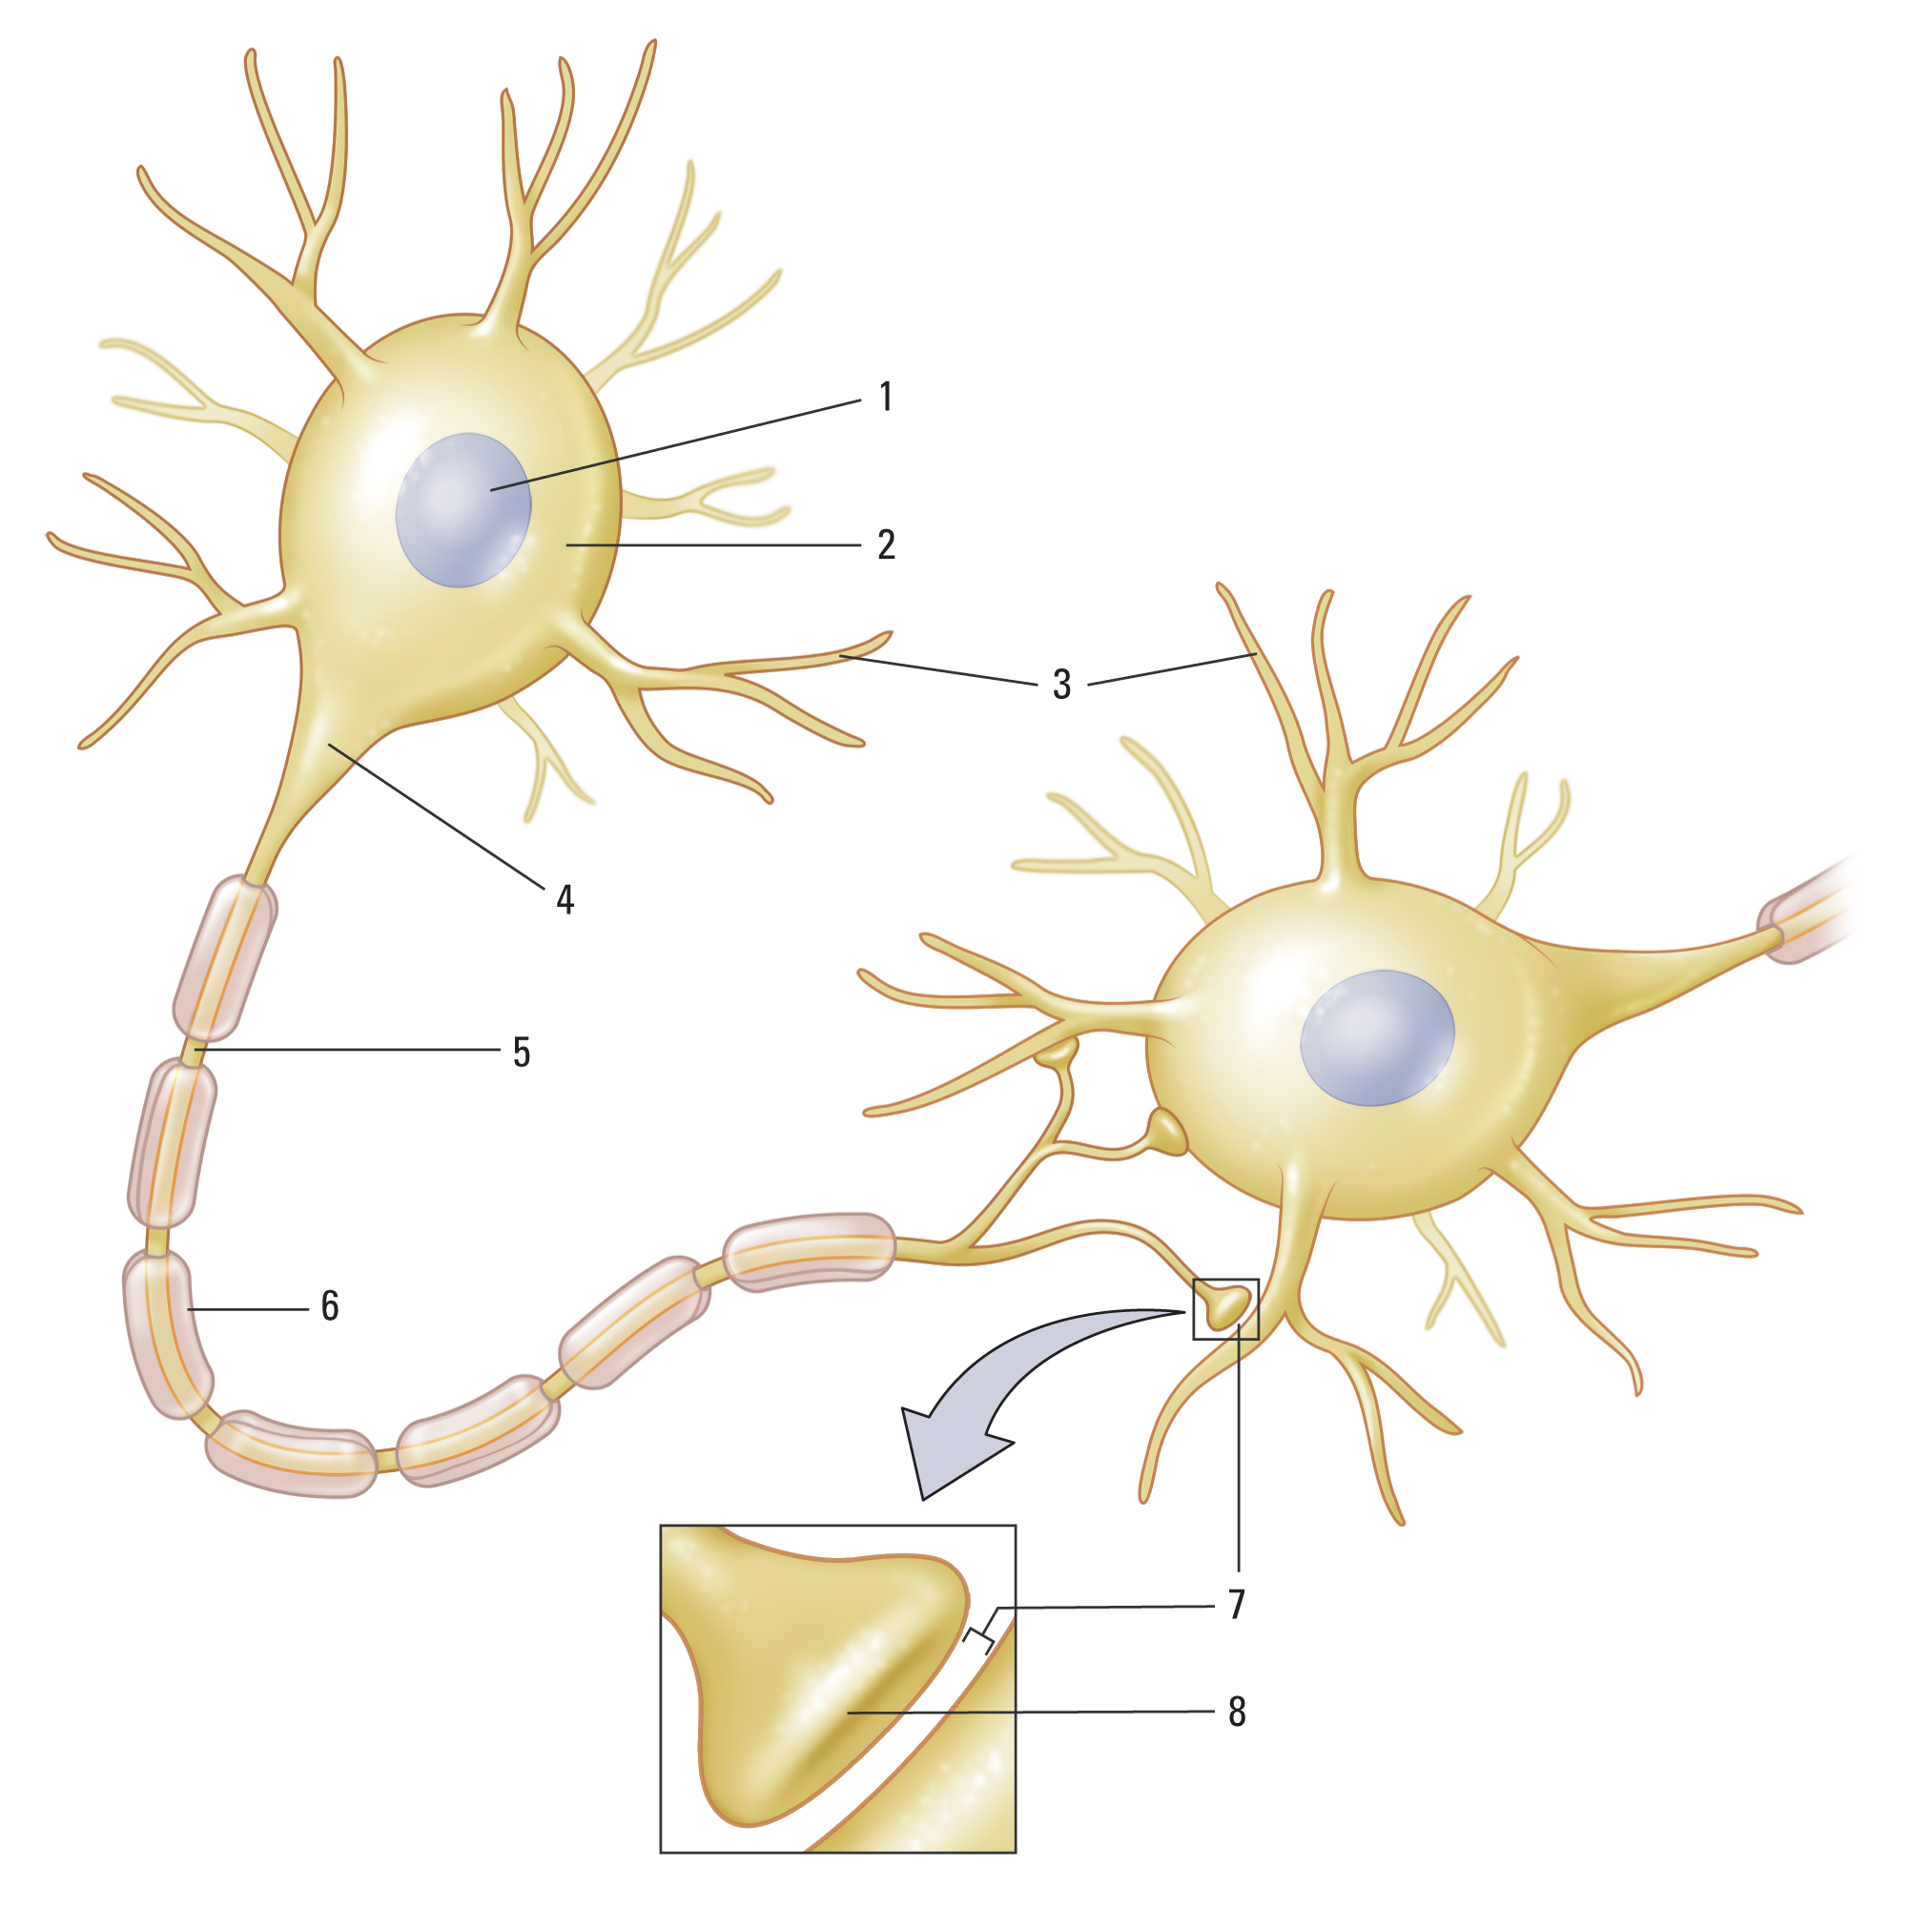 Structure of a neuron and its contact with another neuron.